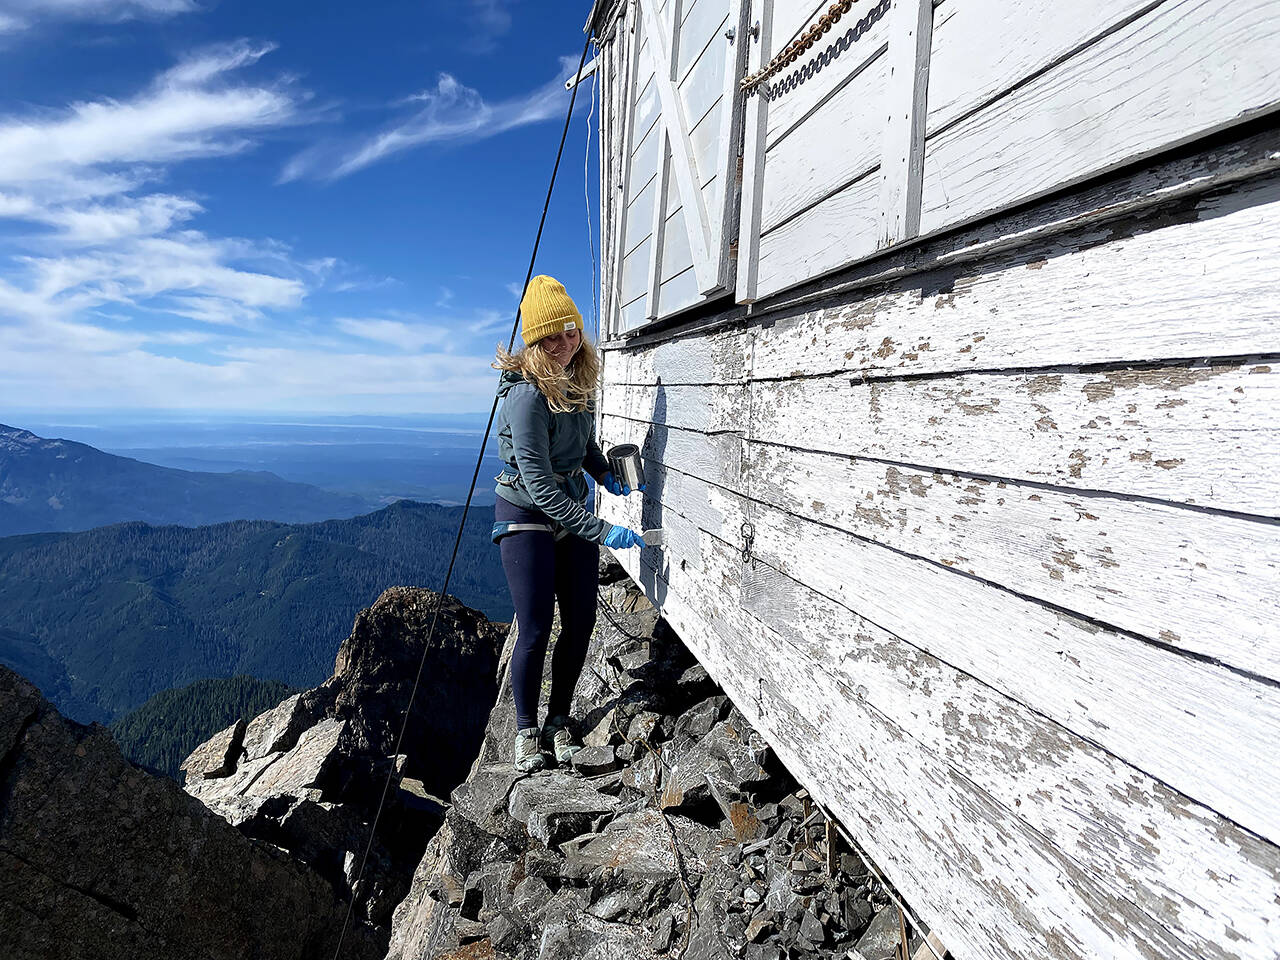 Attached to a harness, Brenna Anderst stands precariously on a ledge as she paints Three Fingers Lookout. (Friends of Three Fingers Lookout)